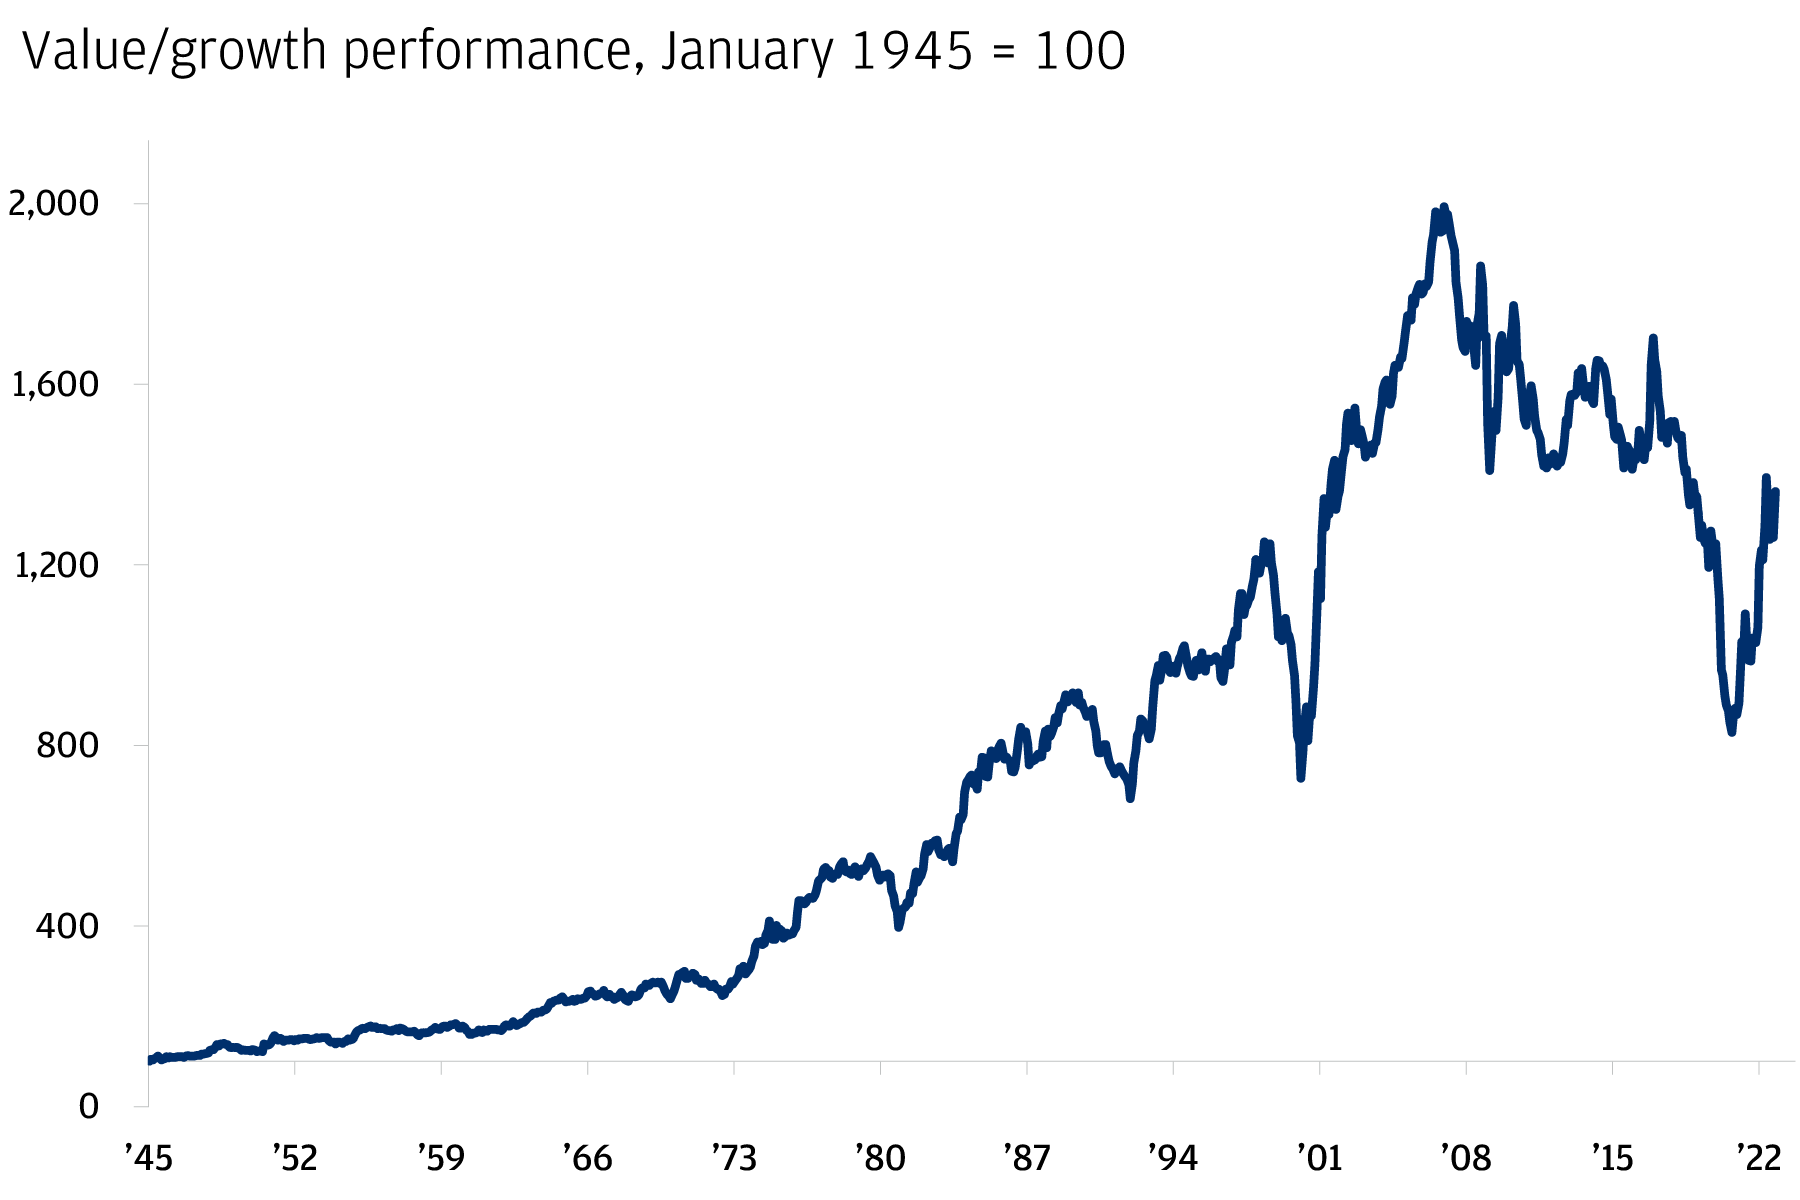 The chart shows the value/growth performance since January 1945 indexed at 100. 